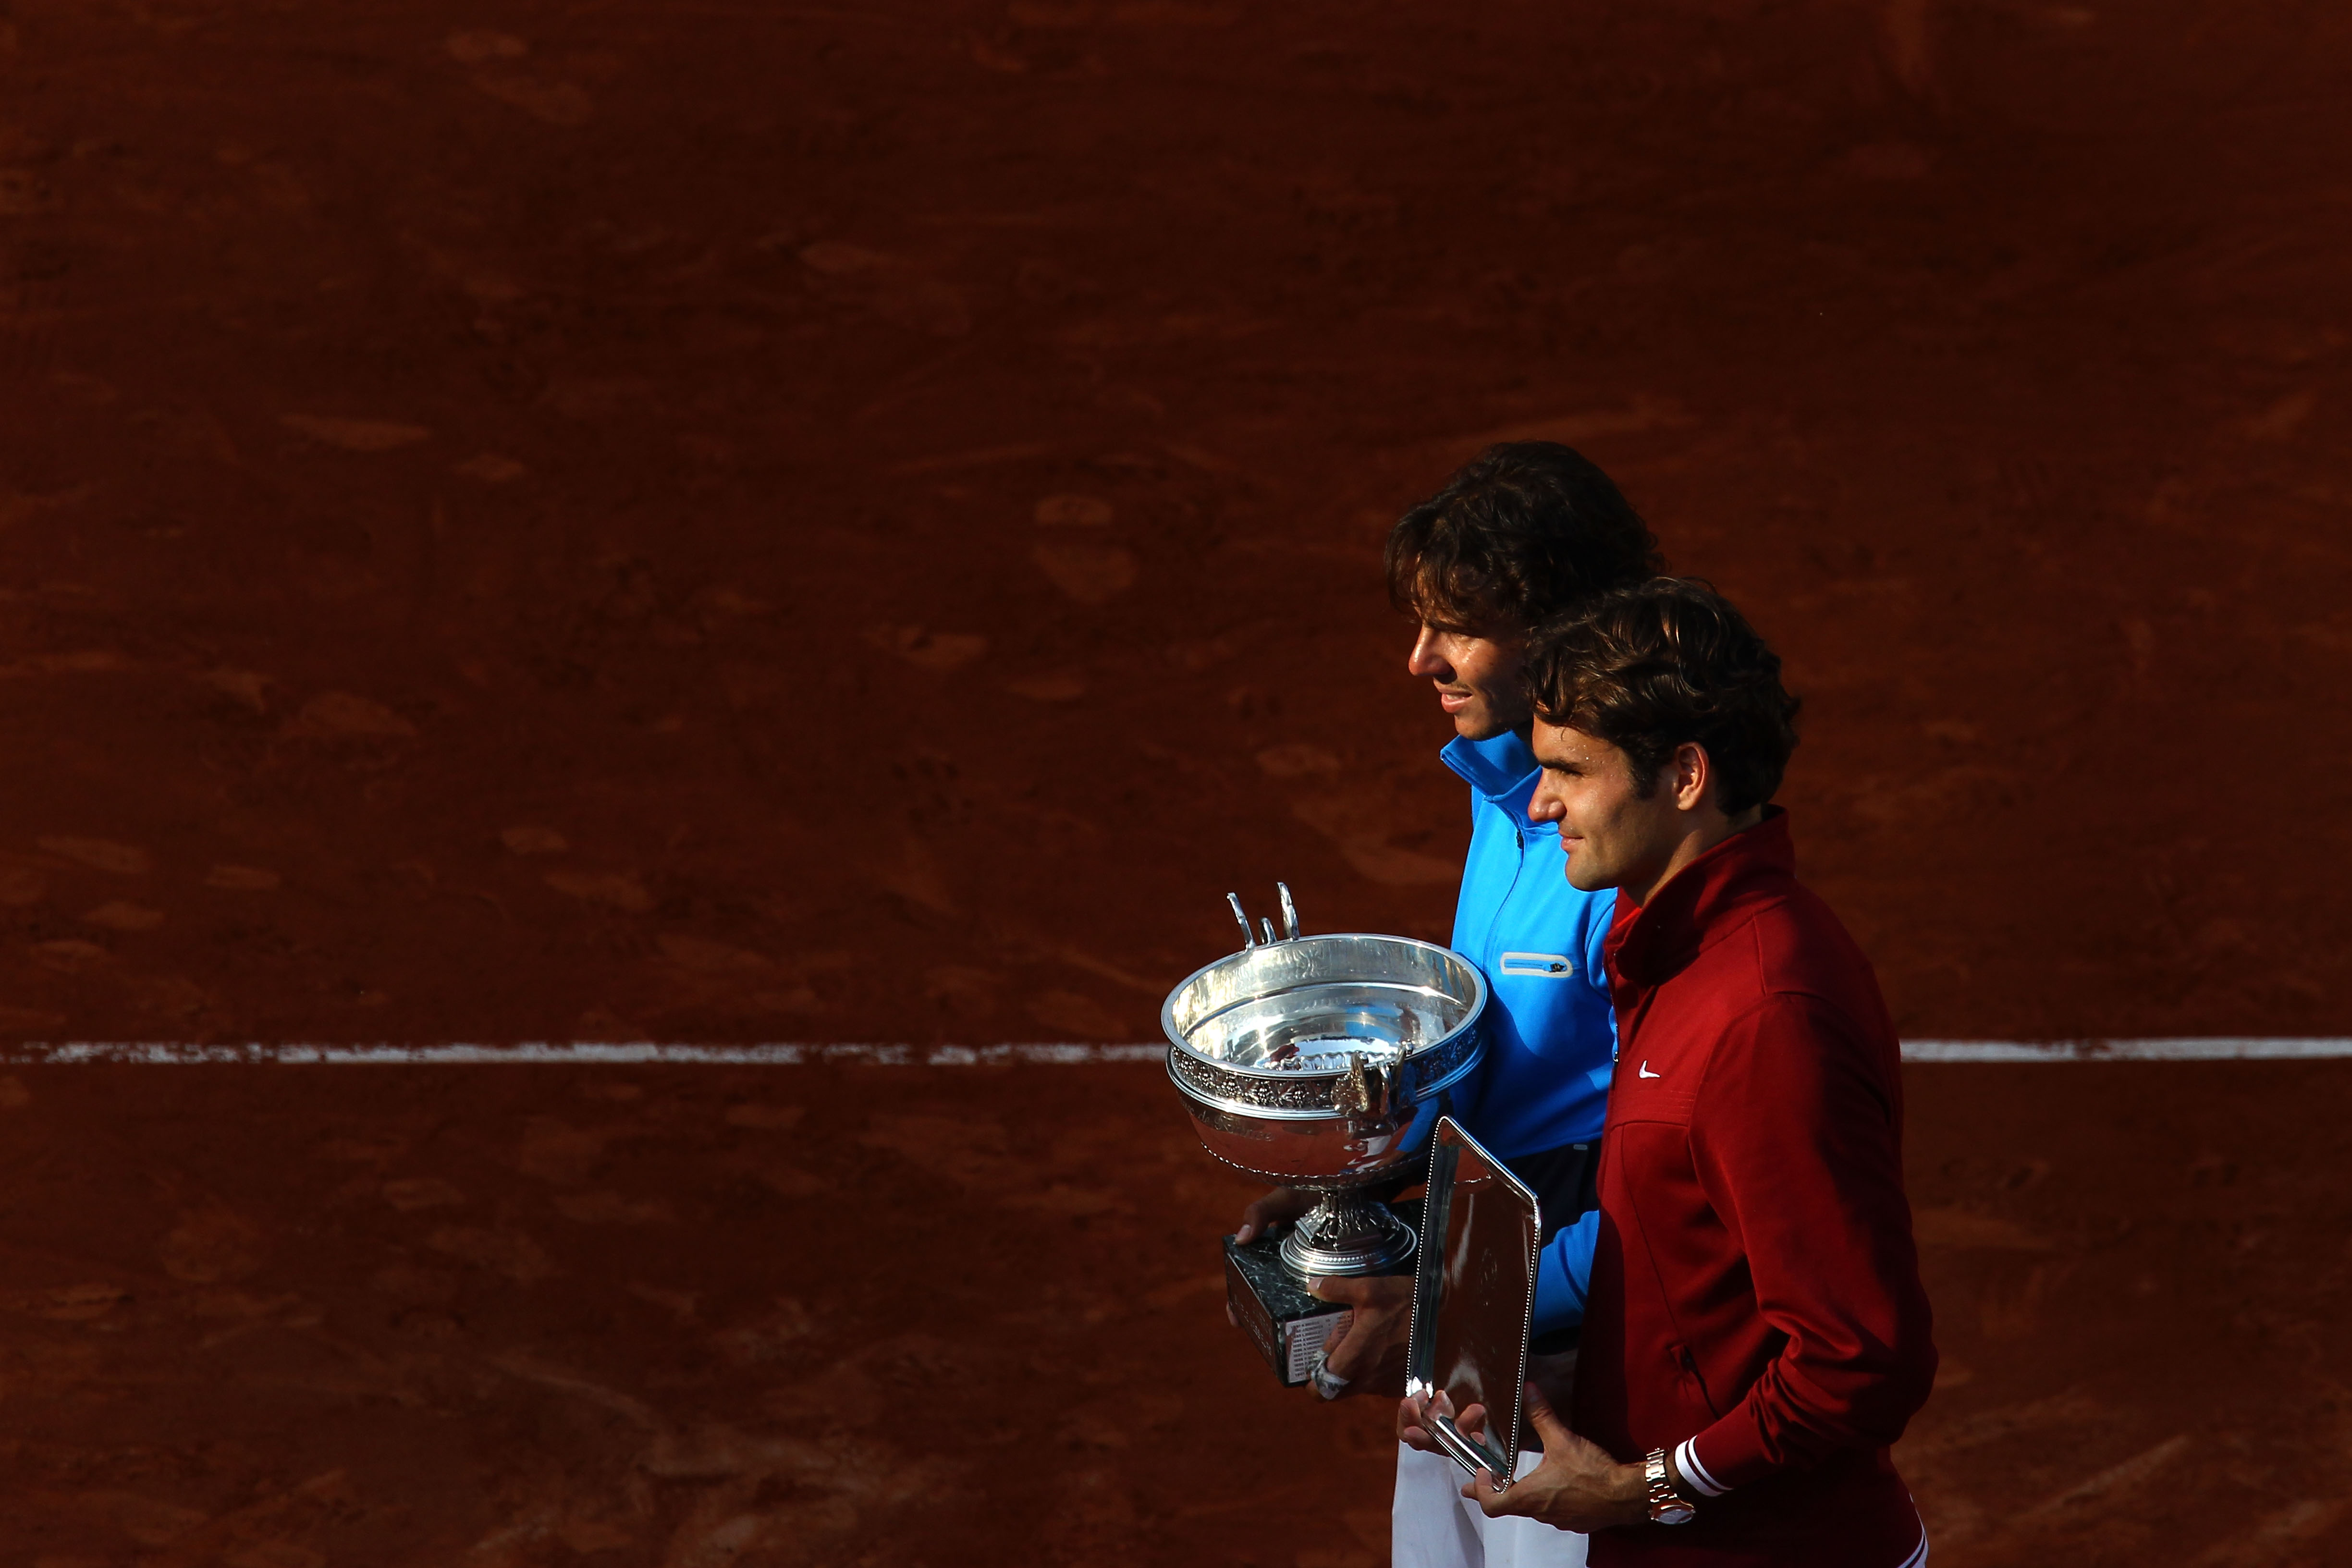 PARIS, FRANCE - JUNE 05:  (L to R) Champion Rafael Nadal of Spain and runner up Roger Federer of Switzerland pose following the men's singles final match between Rafael Nadal of Spain and Roger Federer of Switzerland on day fifteen of the French Open at R